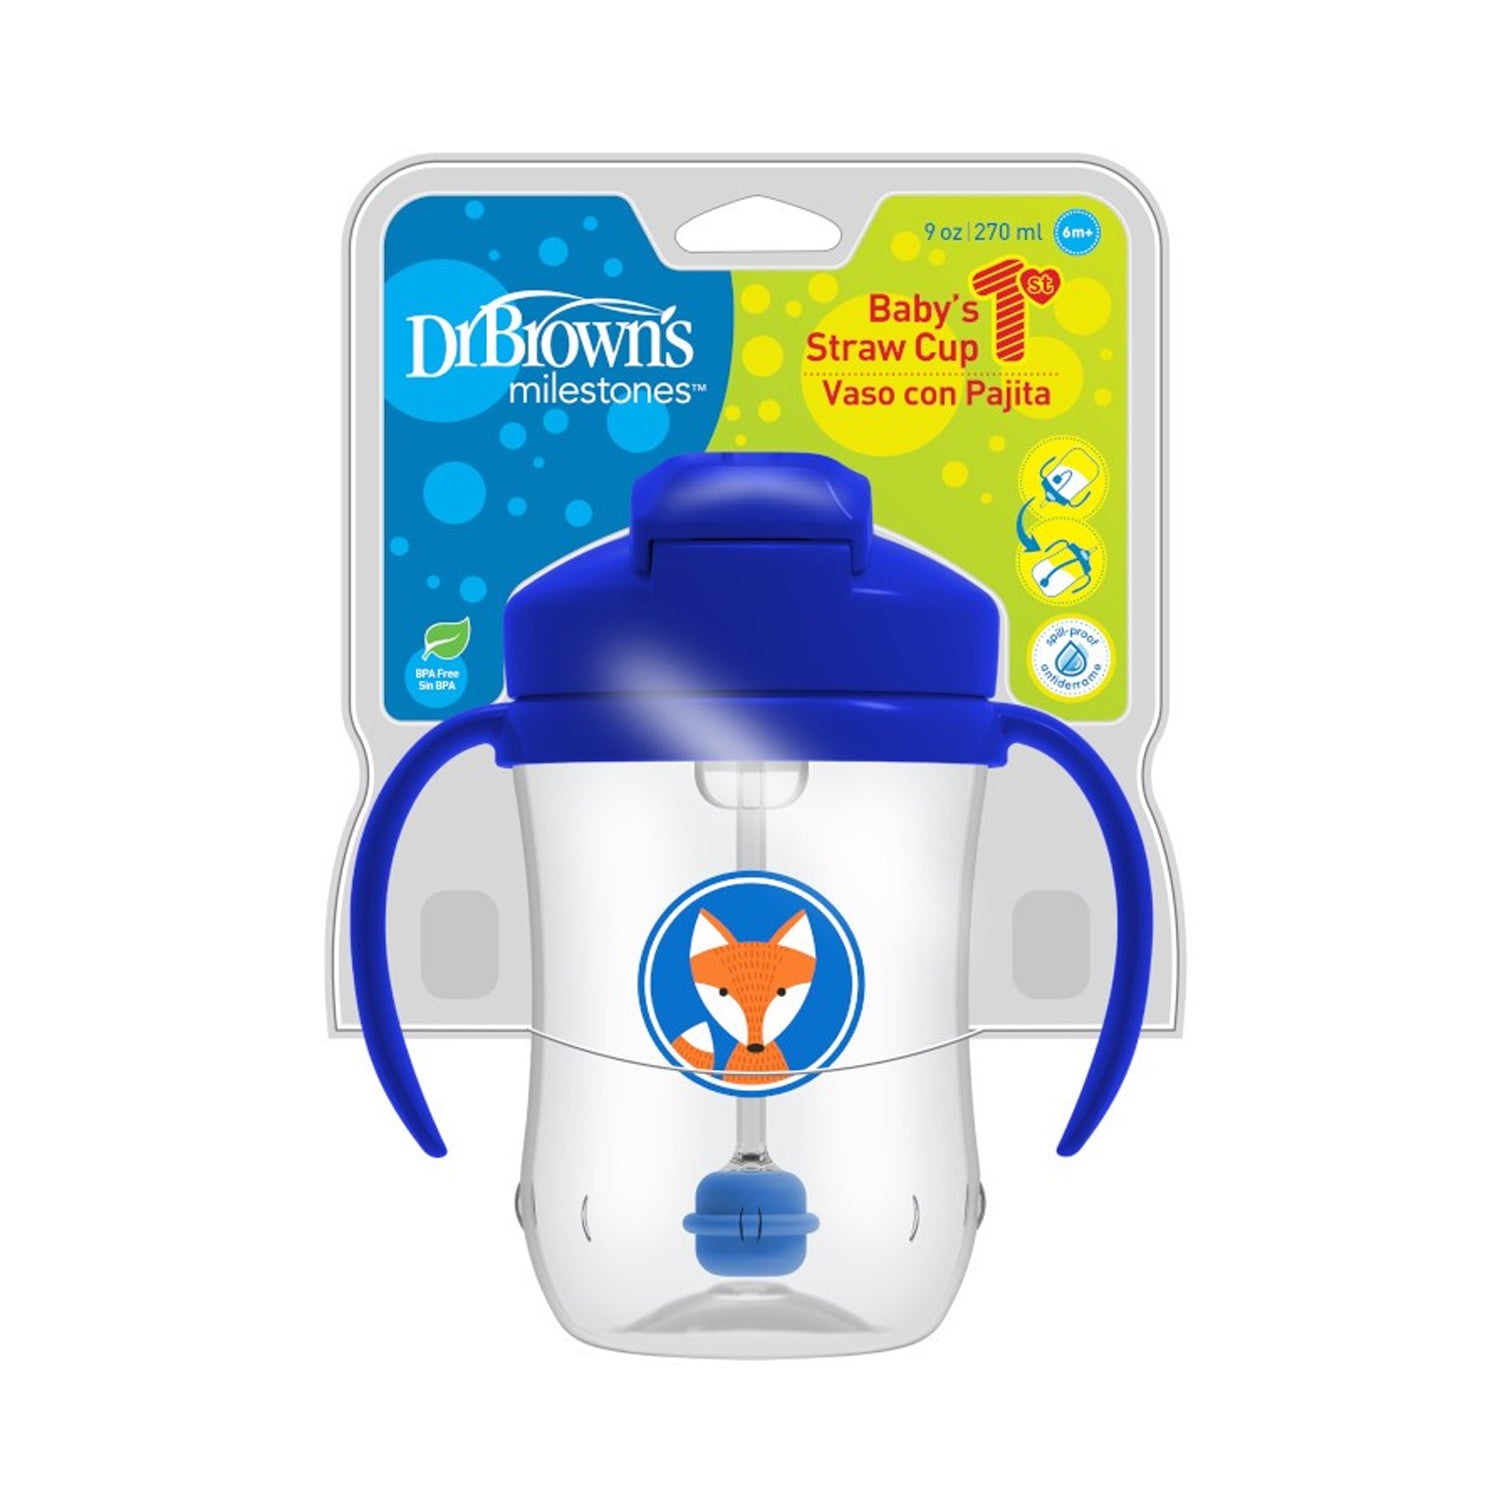 Dr. Browns Baby’s First Straw Cup, 9 Ounce (6m+)